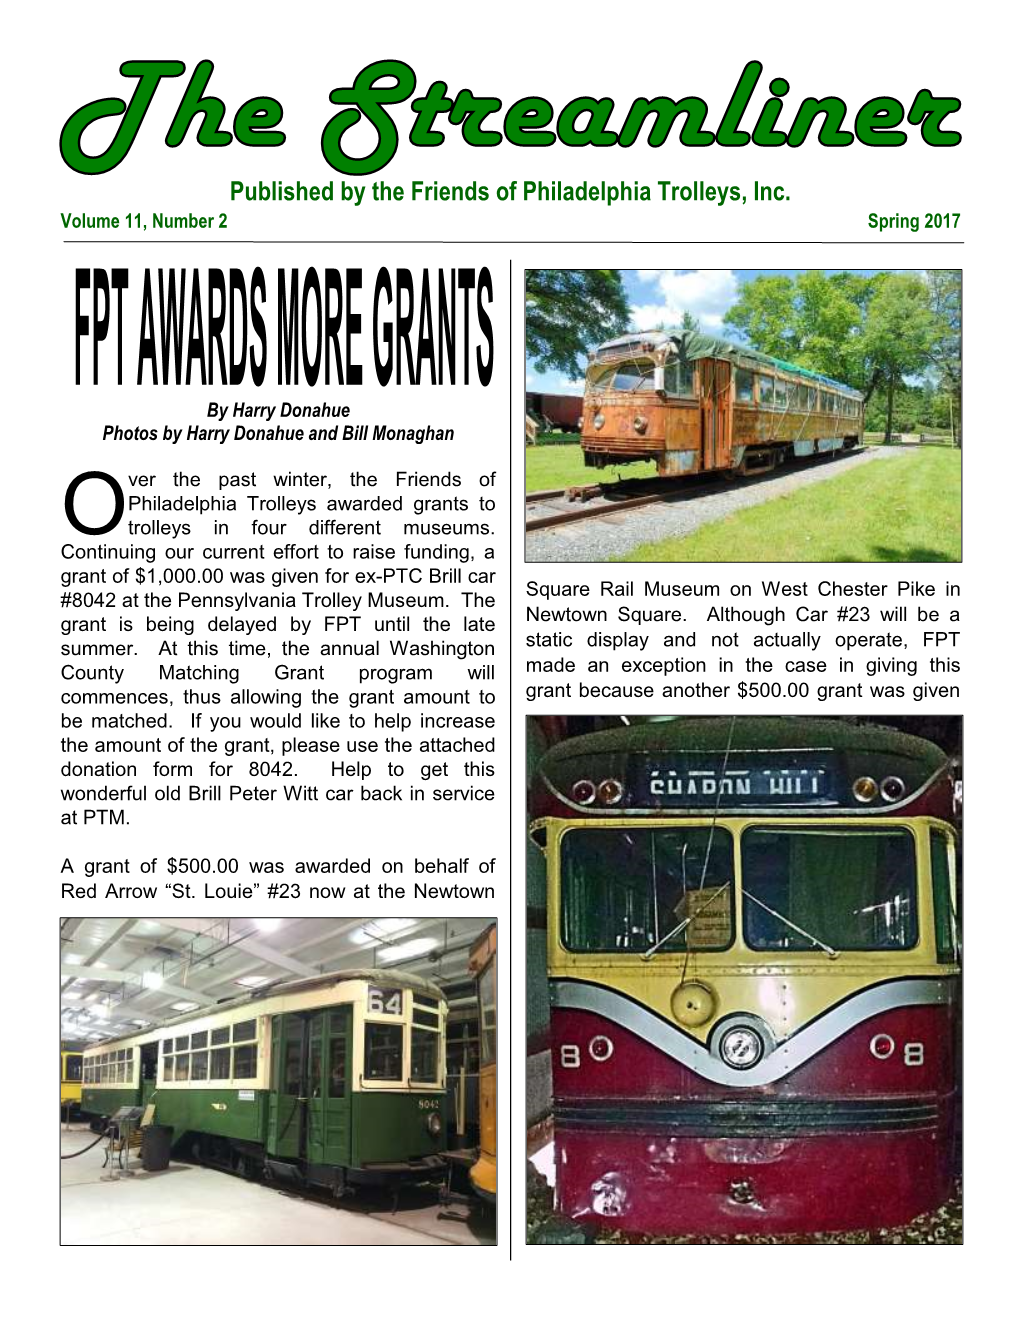 Published by the Friends of Philadelphia Trolleys, Inc. Volume 11, Number 2 Spring 2017